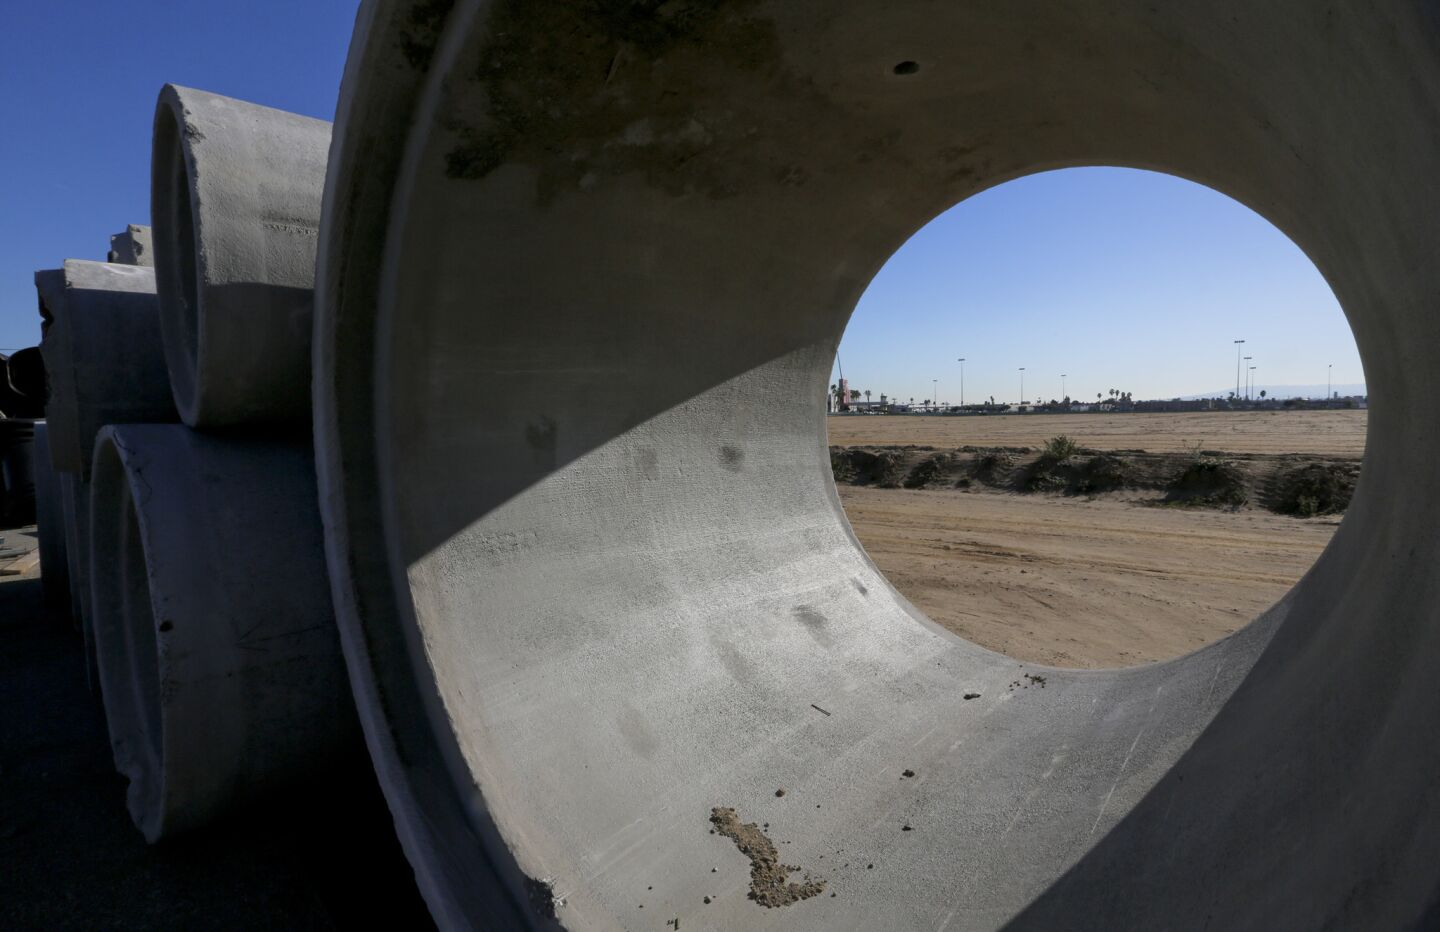 Giant concrete sewer pipes await use at the site of the former Hollywood Park site in Inglewood where an NFL stadium will eventually be constructed.